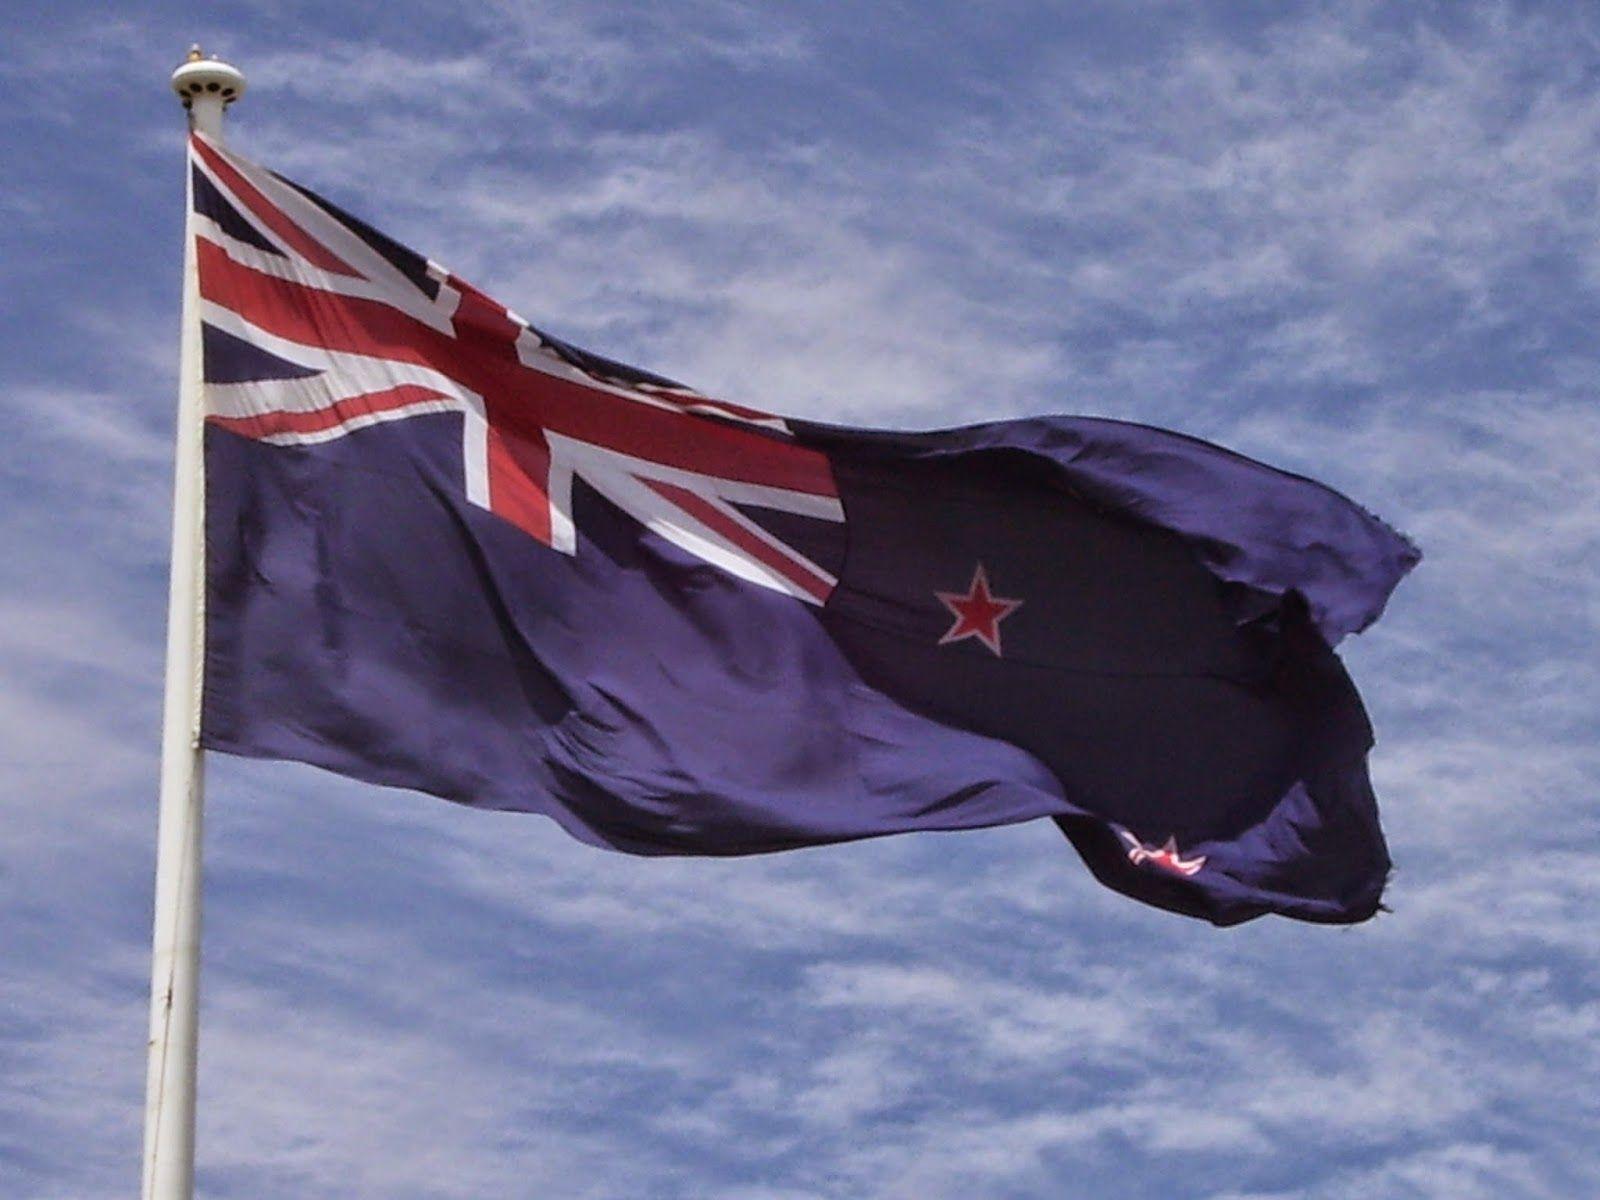 New zealand flag wallpapers